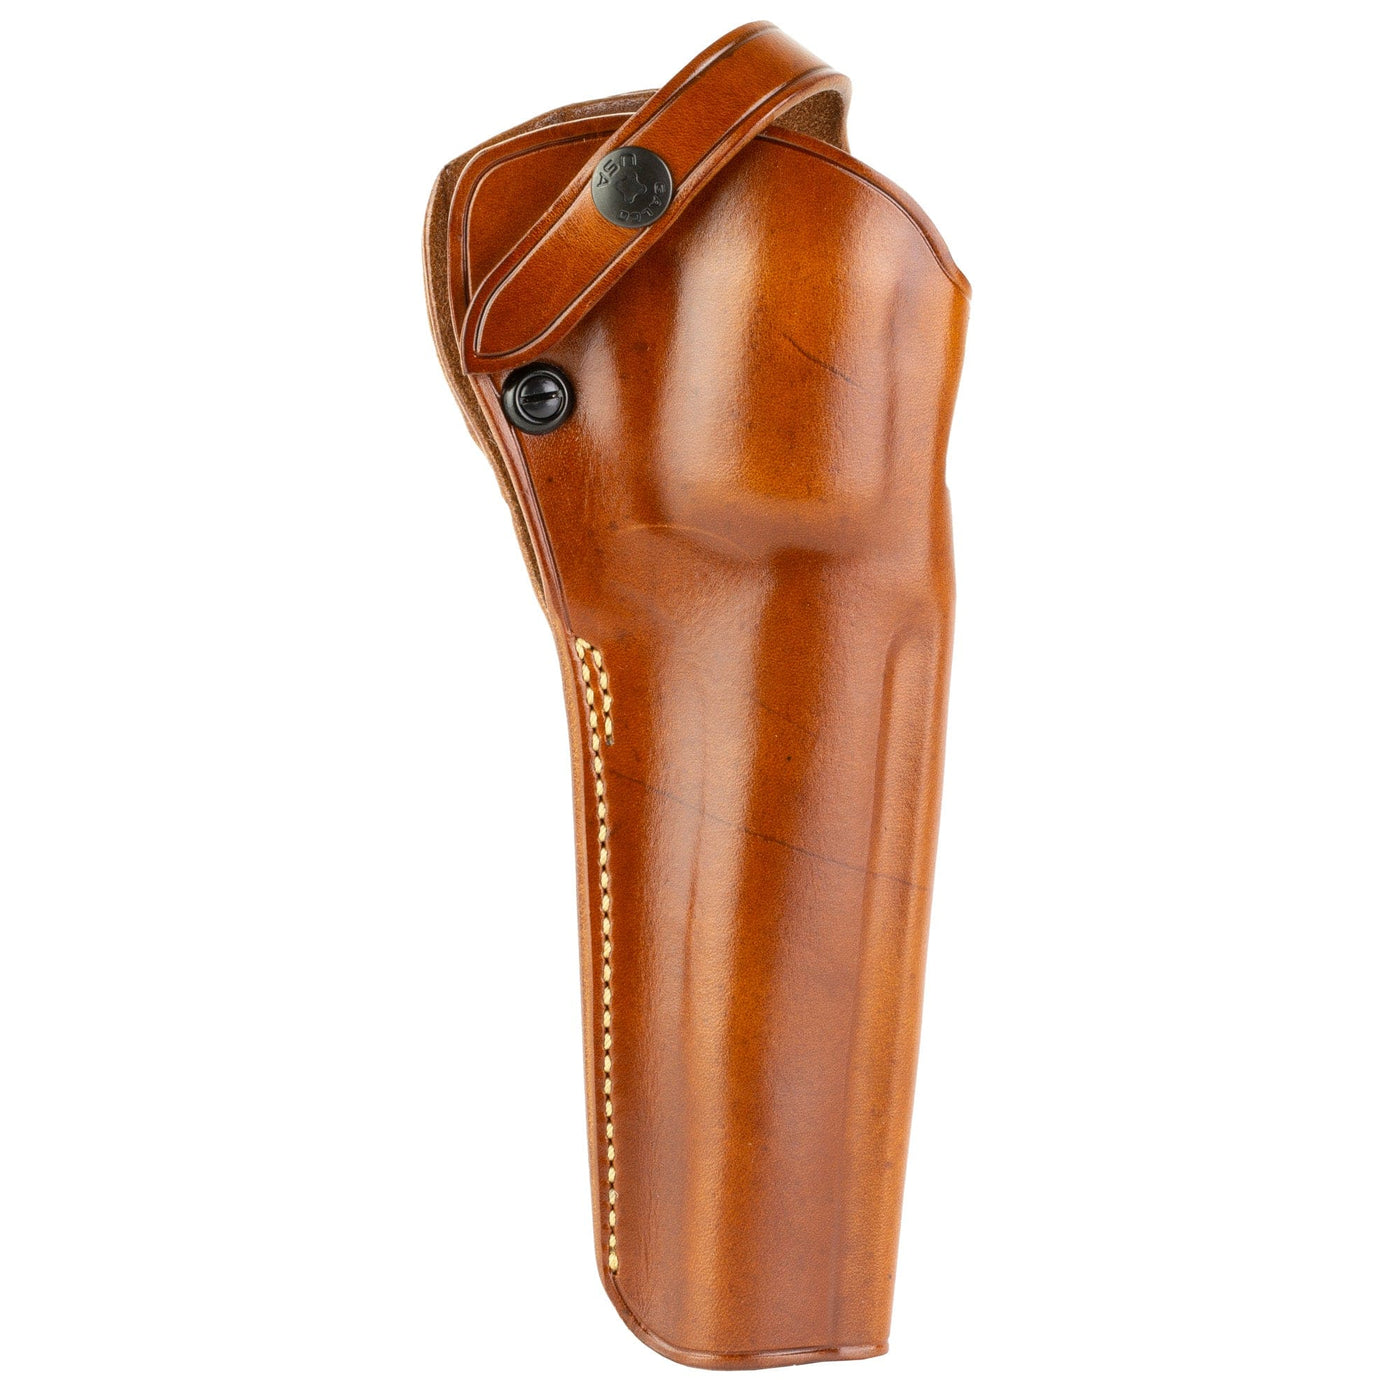 Galco Galco Sao Belt Holster Rh - Leather Ruger 6 1/2" Bbl Tan Firearm Accessories